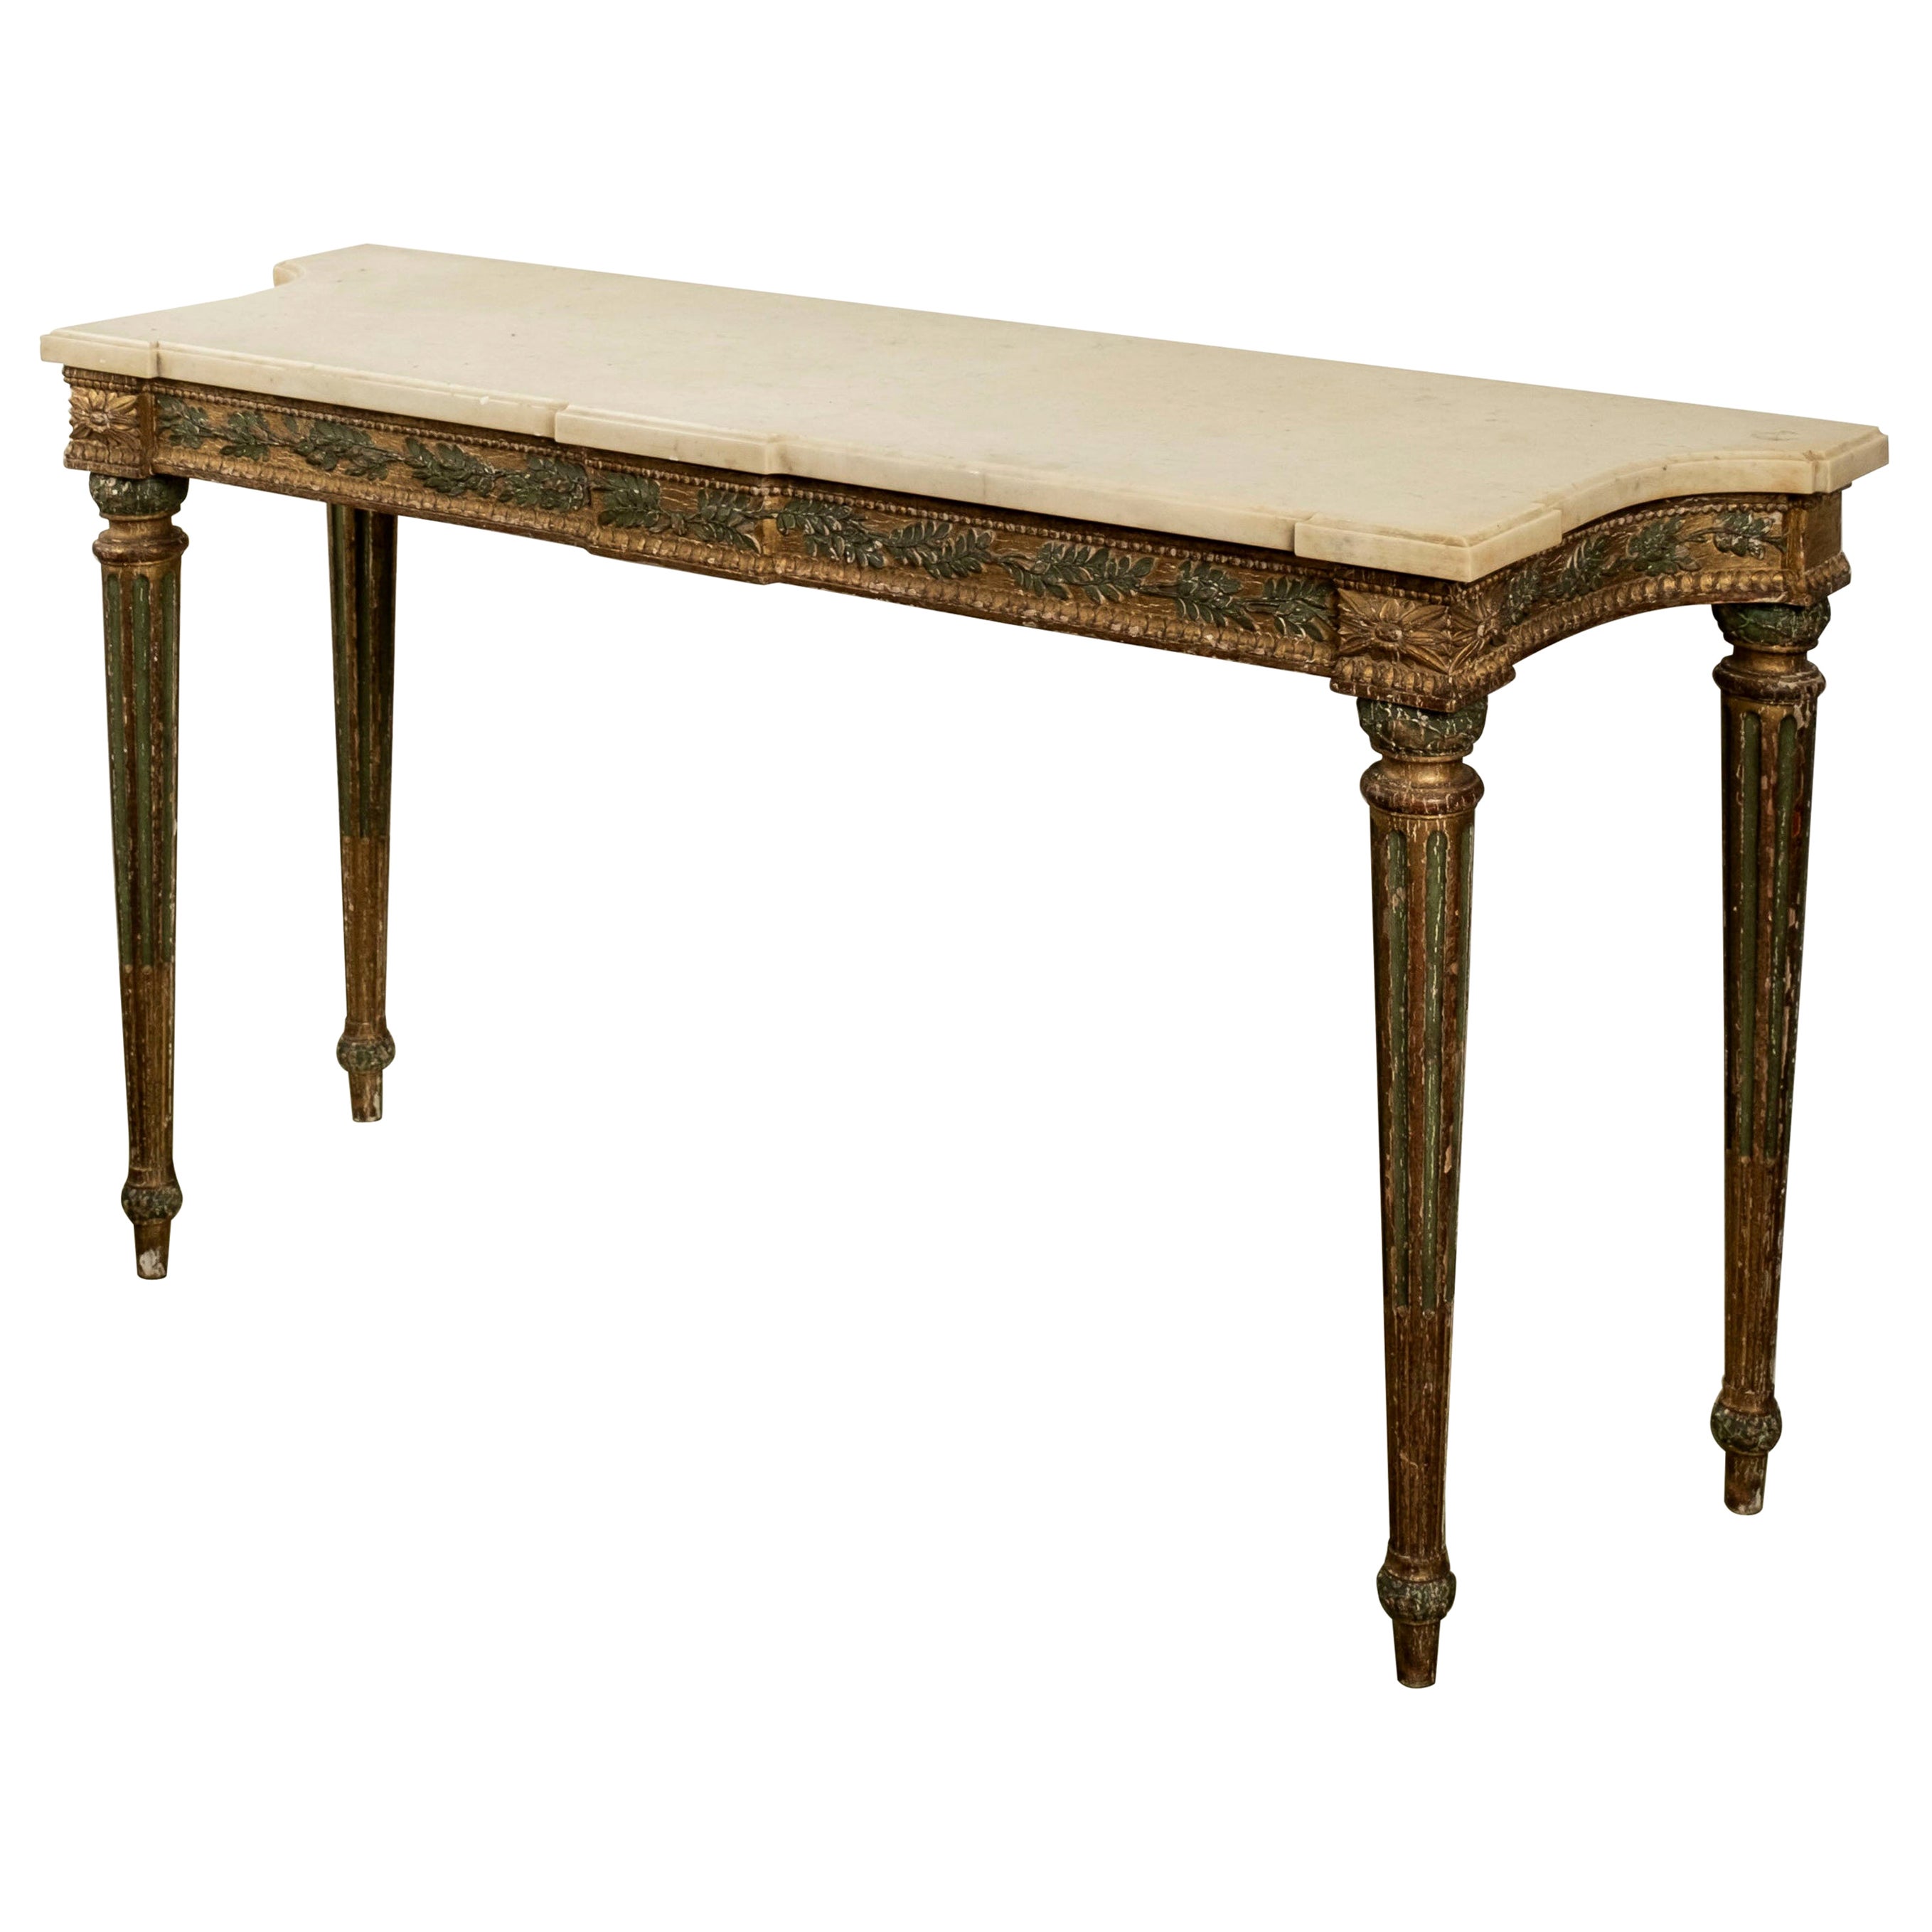 18th Century Italian Louis XVI Painted and Giltwood Freestanding Console Table